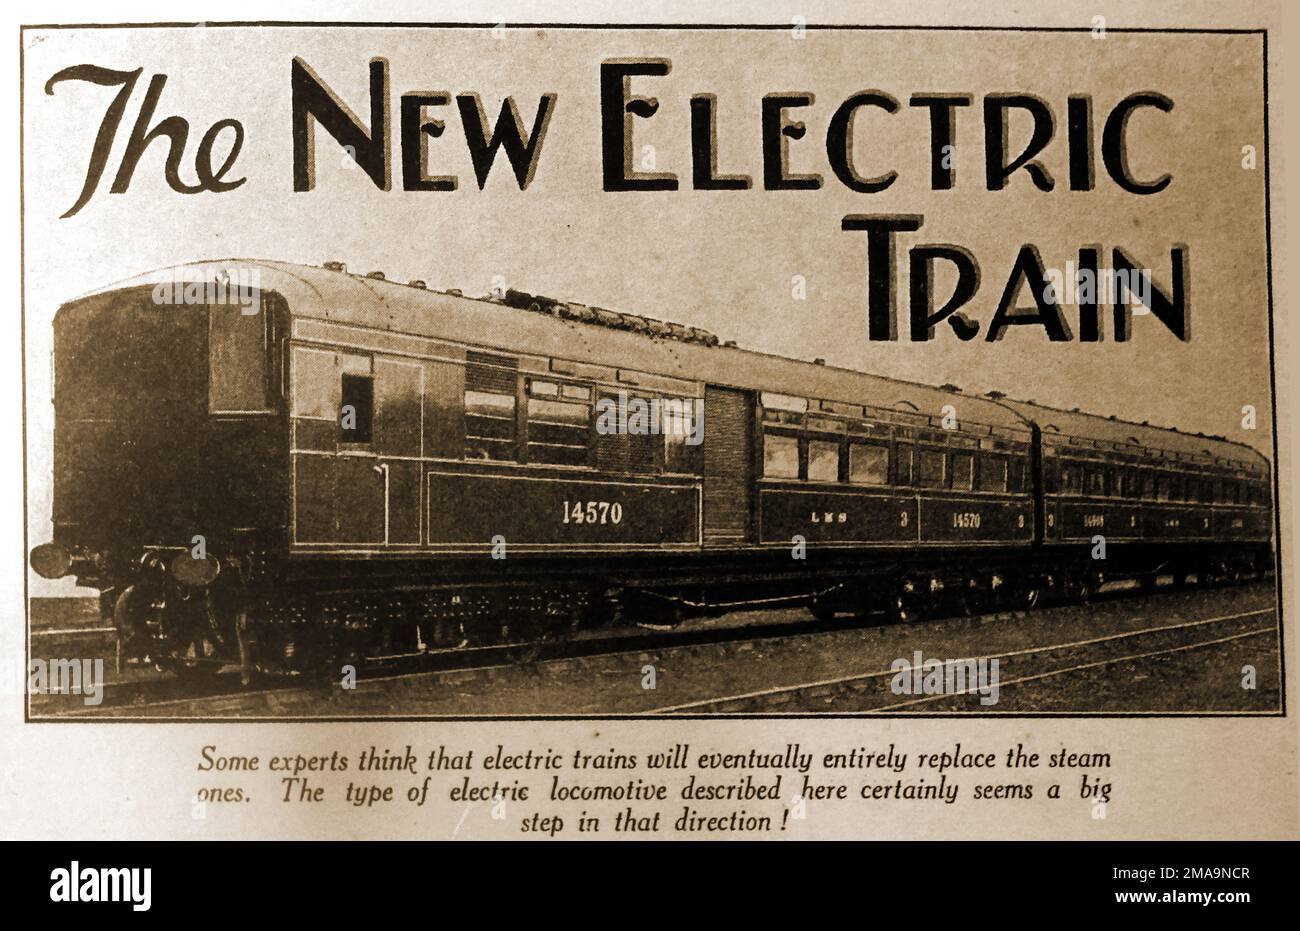 A 1930 image of The newly introduced Electric Train, speculating it could replace steam. Stock Photo